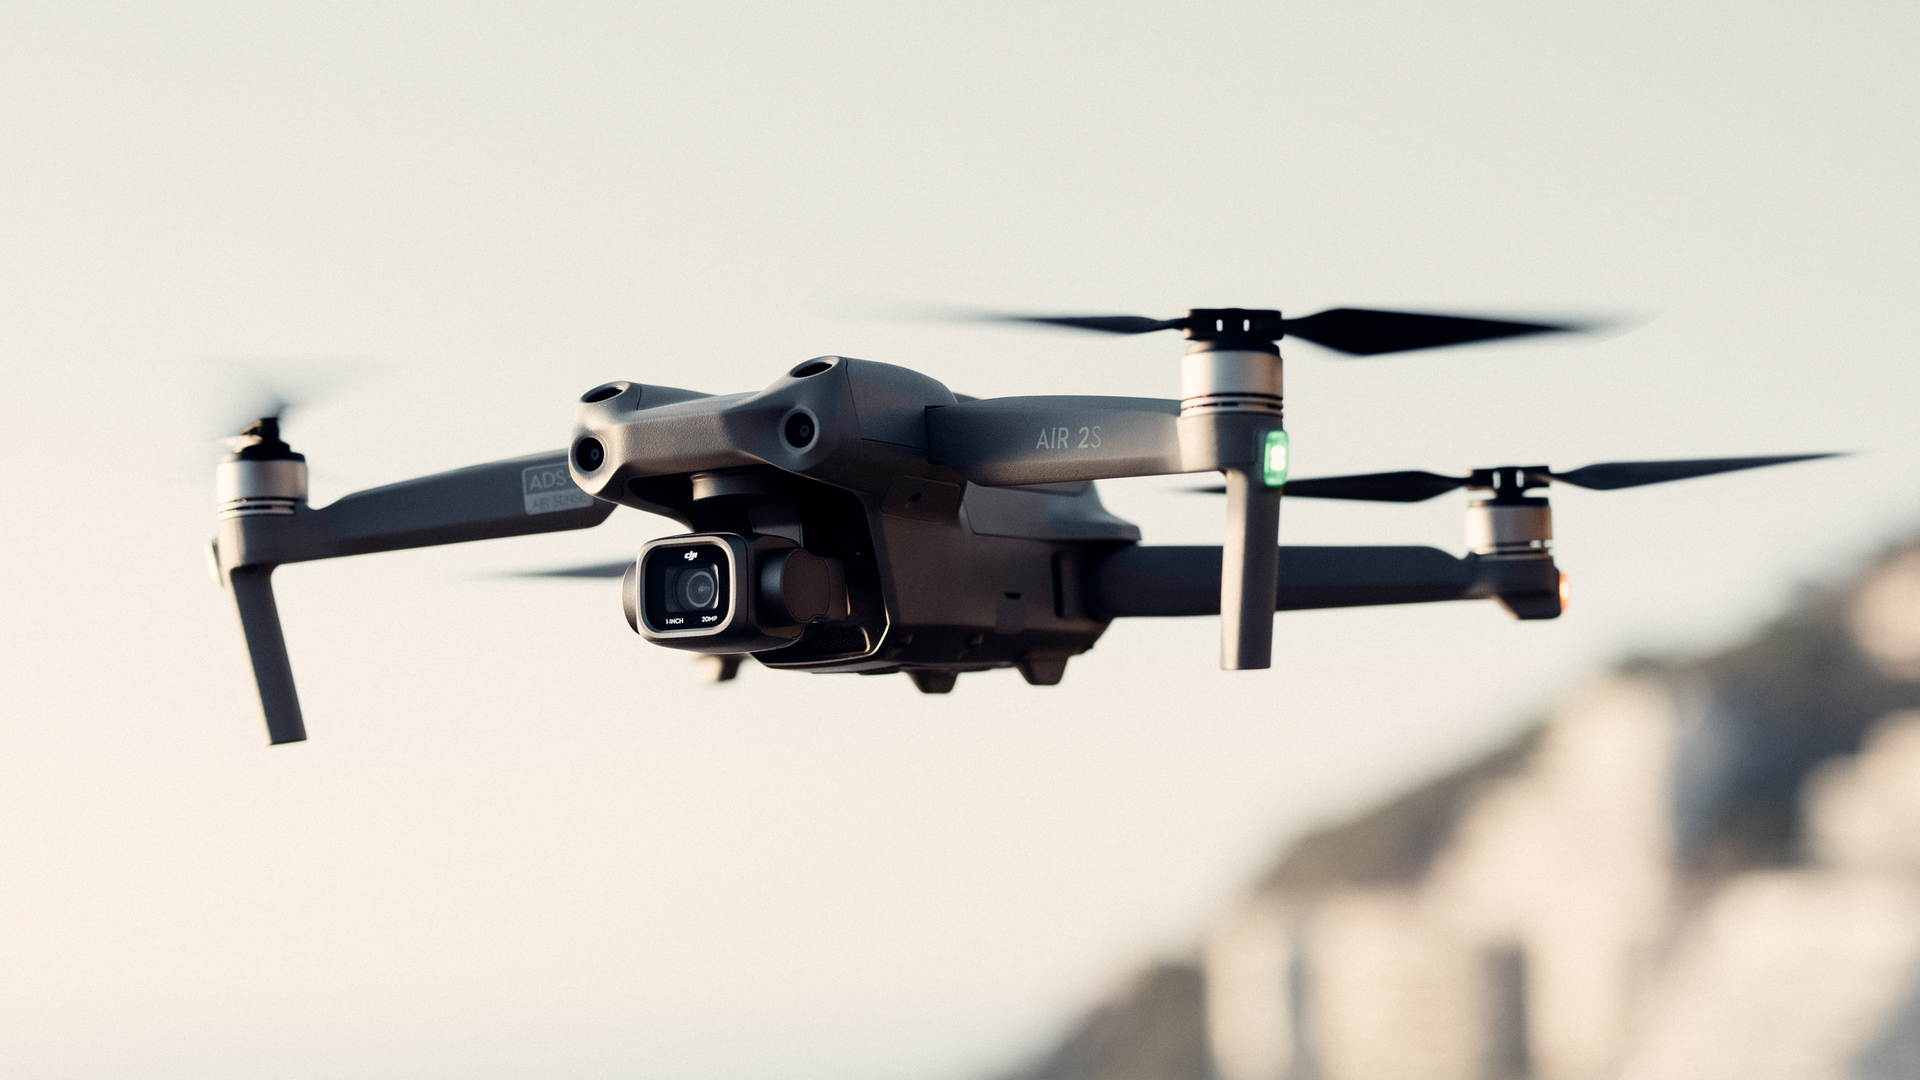 DJI Air 2S  The All-In-One Drone Tested